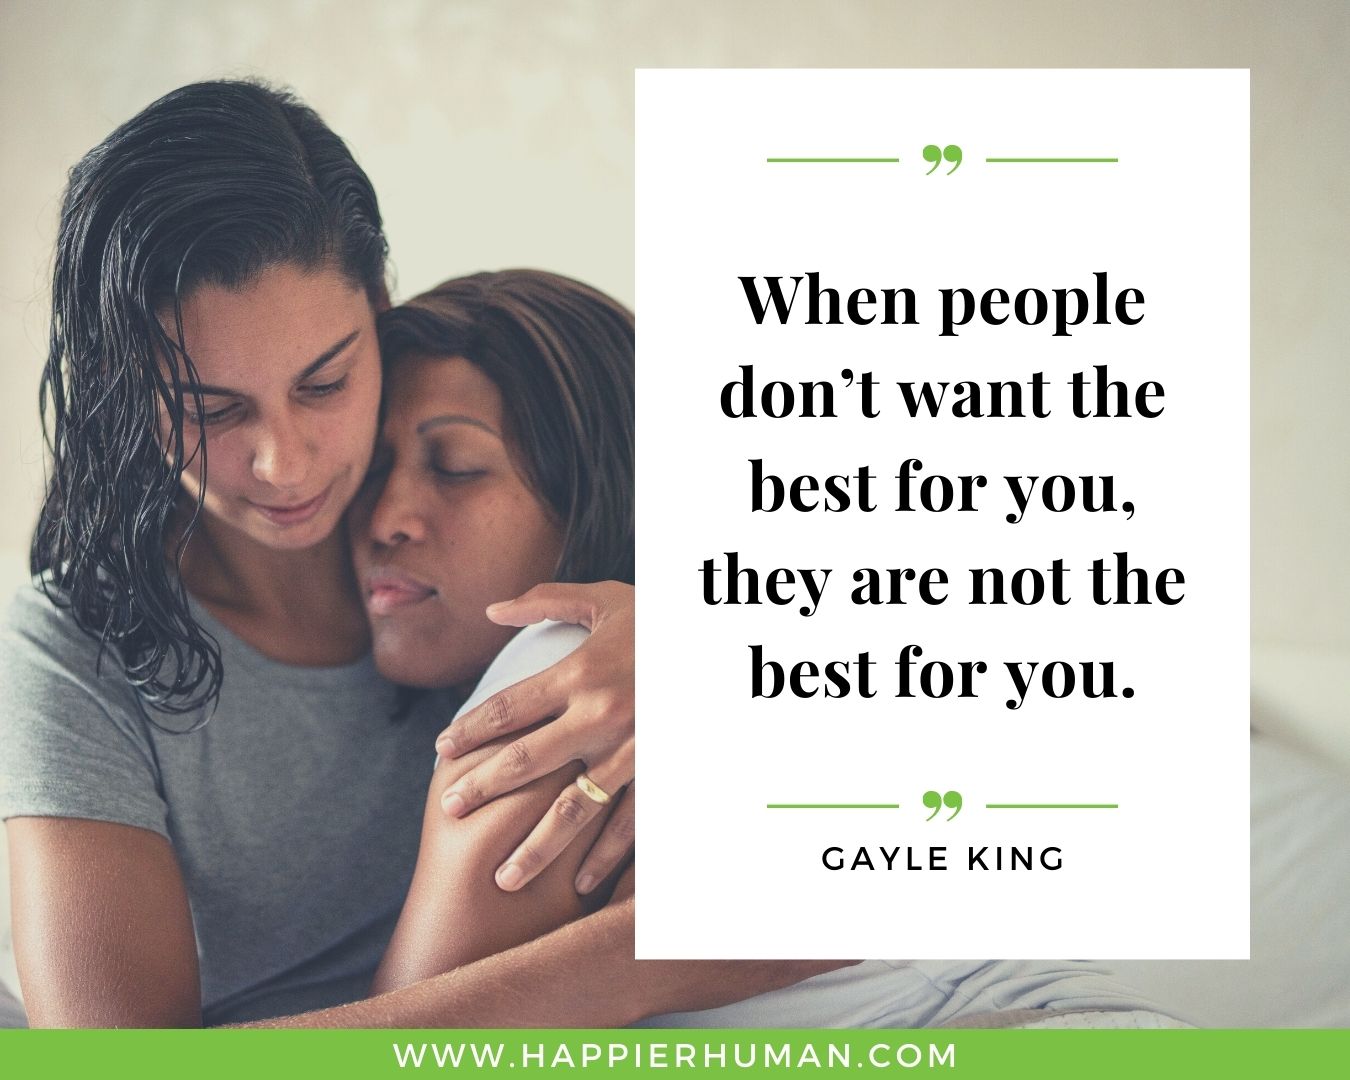 Haters Quotes - “When people don’t want the best for you, they are not the best for you.” - Gayle King